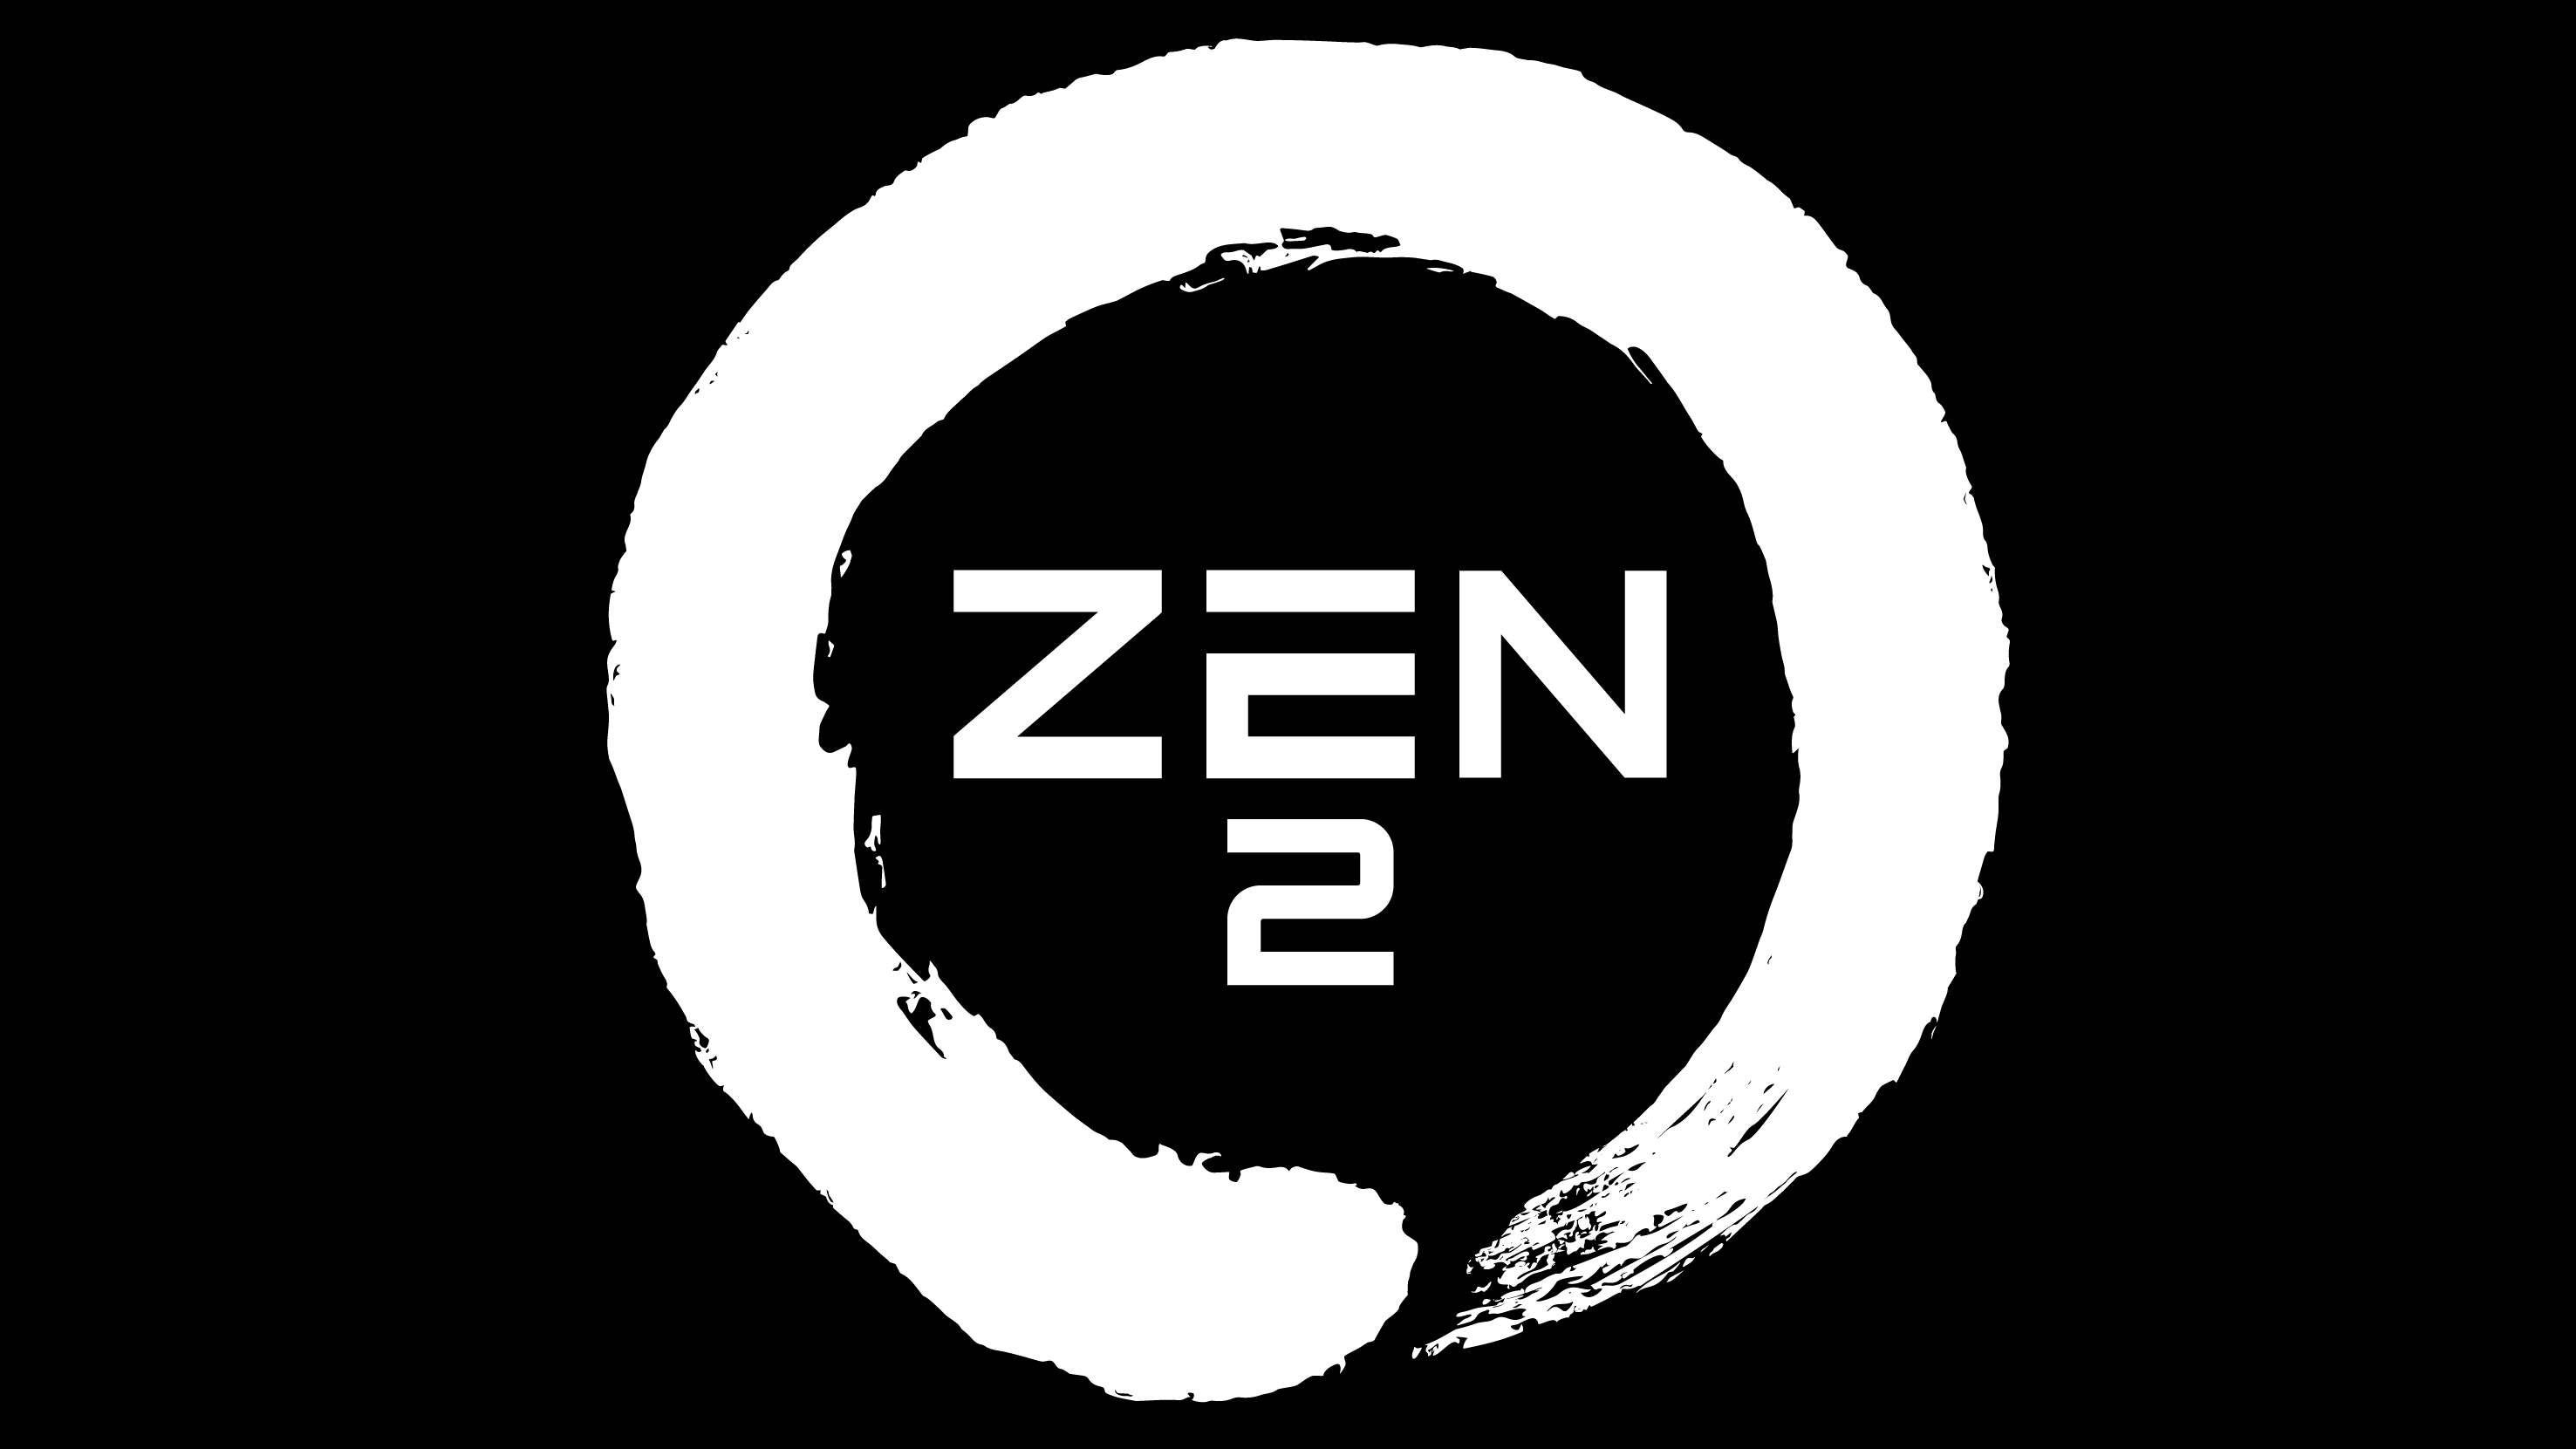 AMD Zen Logo - AMD's Zen 2 CPUs mix 7nm and 14nm silicon in a “revolutionary ...